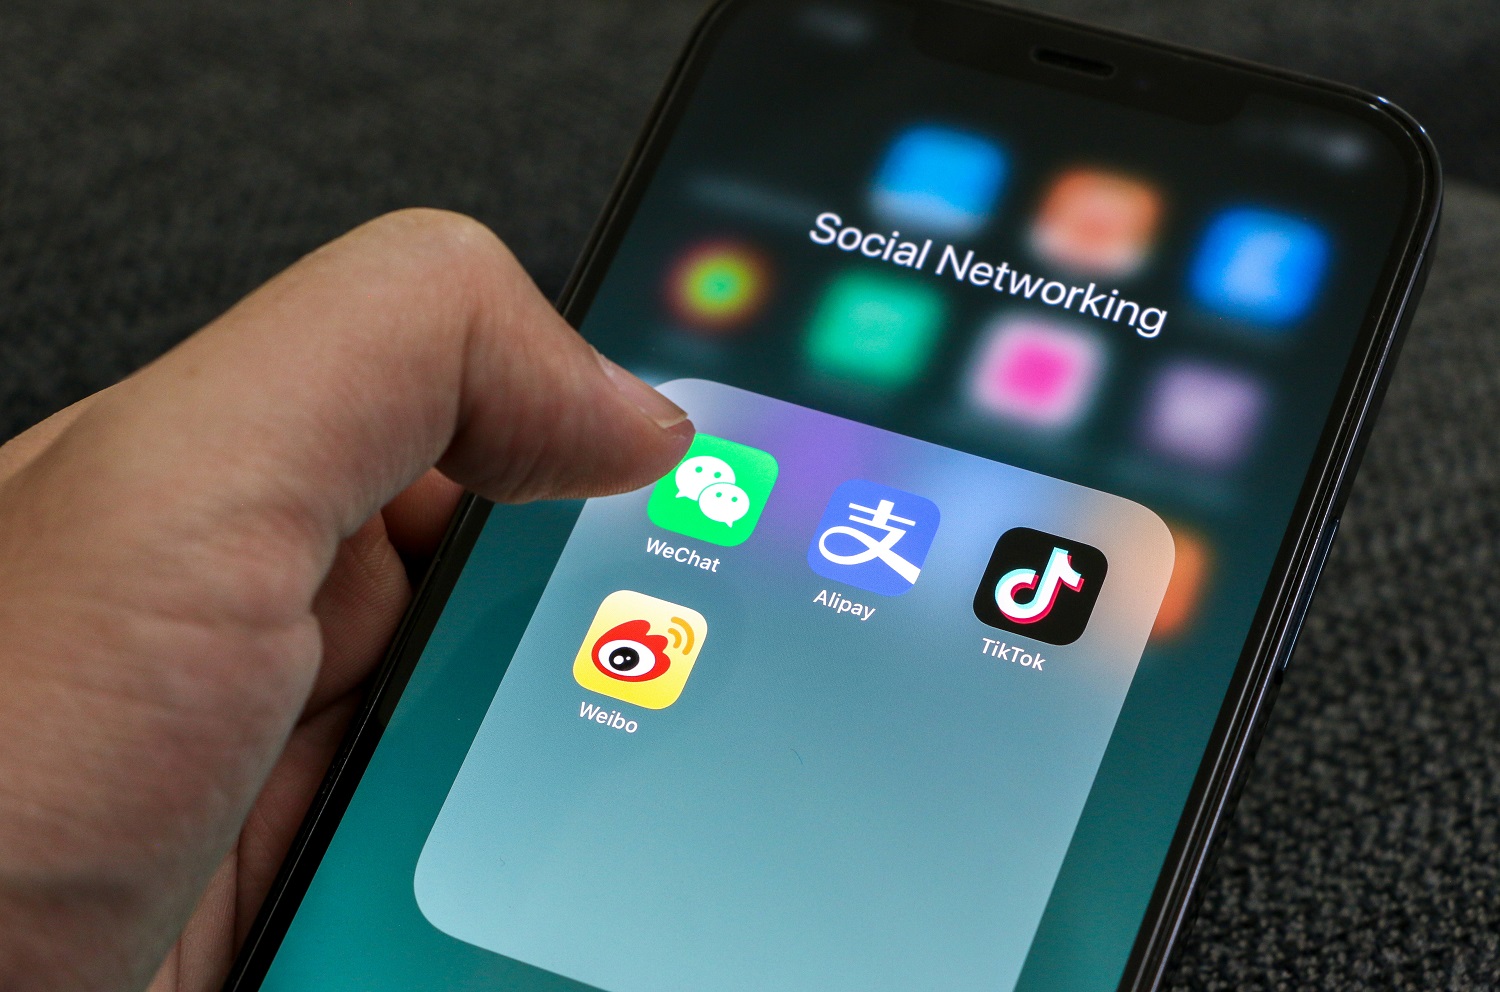 A person’s hand holds a mobile phone and is about to launch a Chinese social media app, with WeChat, Alipay, TikTok, and Weibo icons displayed.